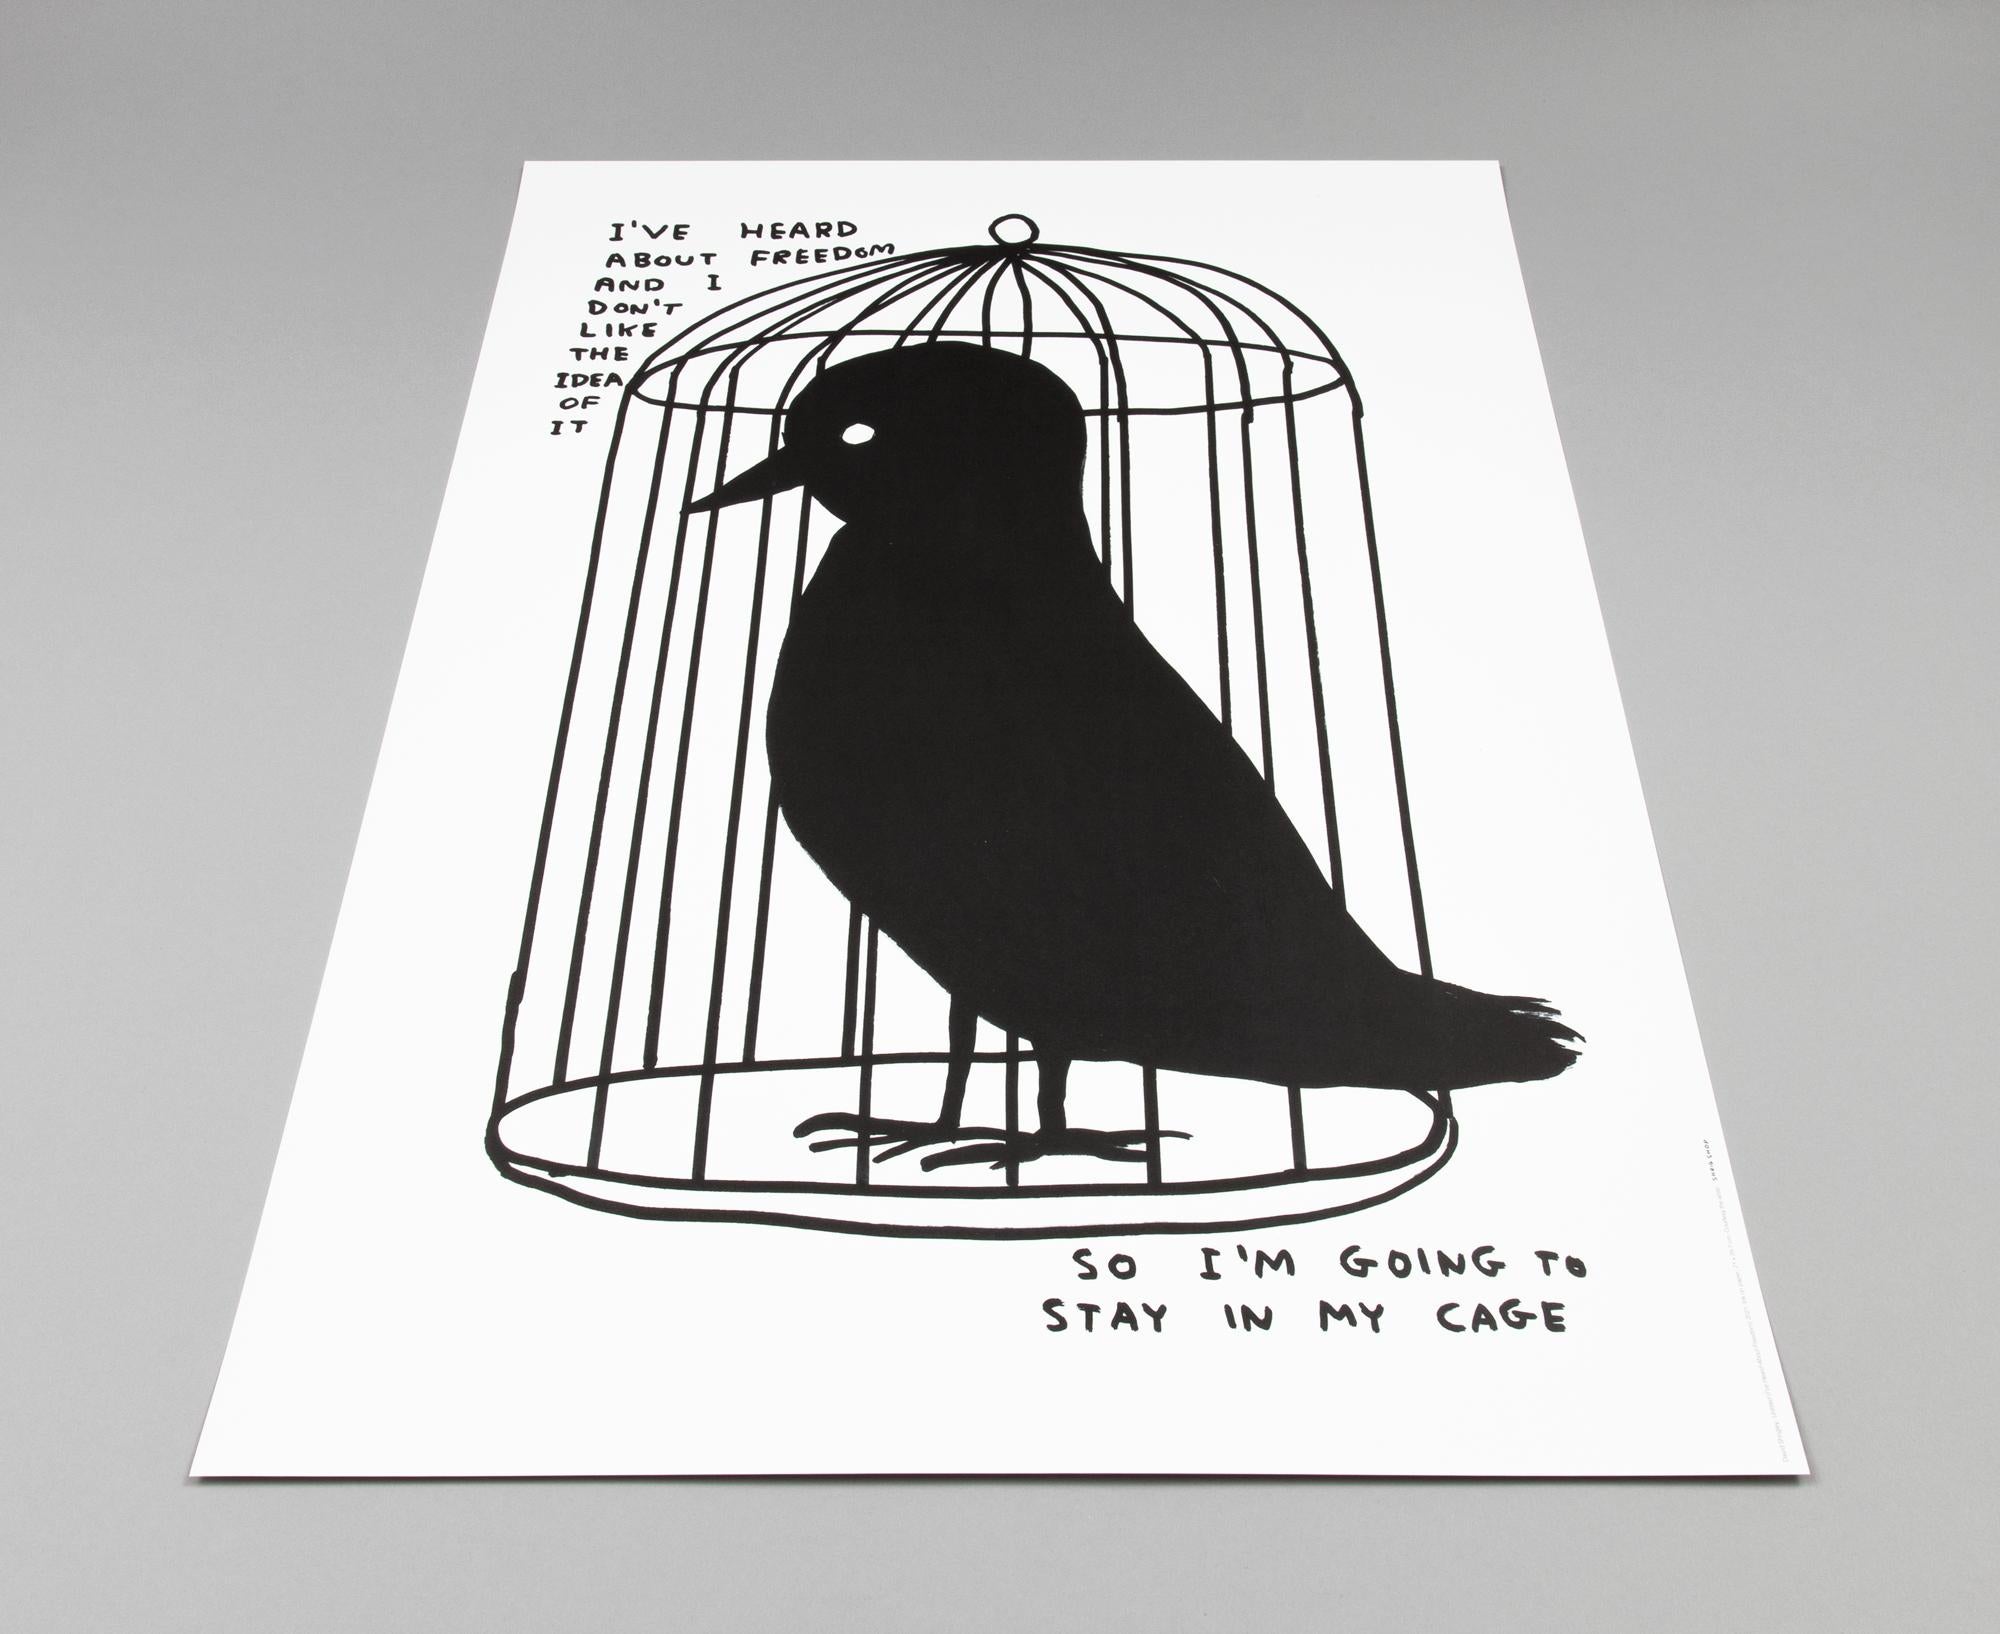 David Shrigley, I’ve Heard About Freedom + Do Not Eat Him - Set of 2 Prints For Sale 1